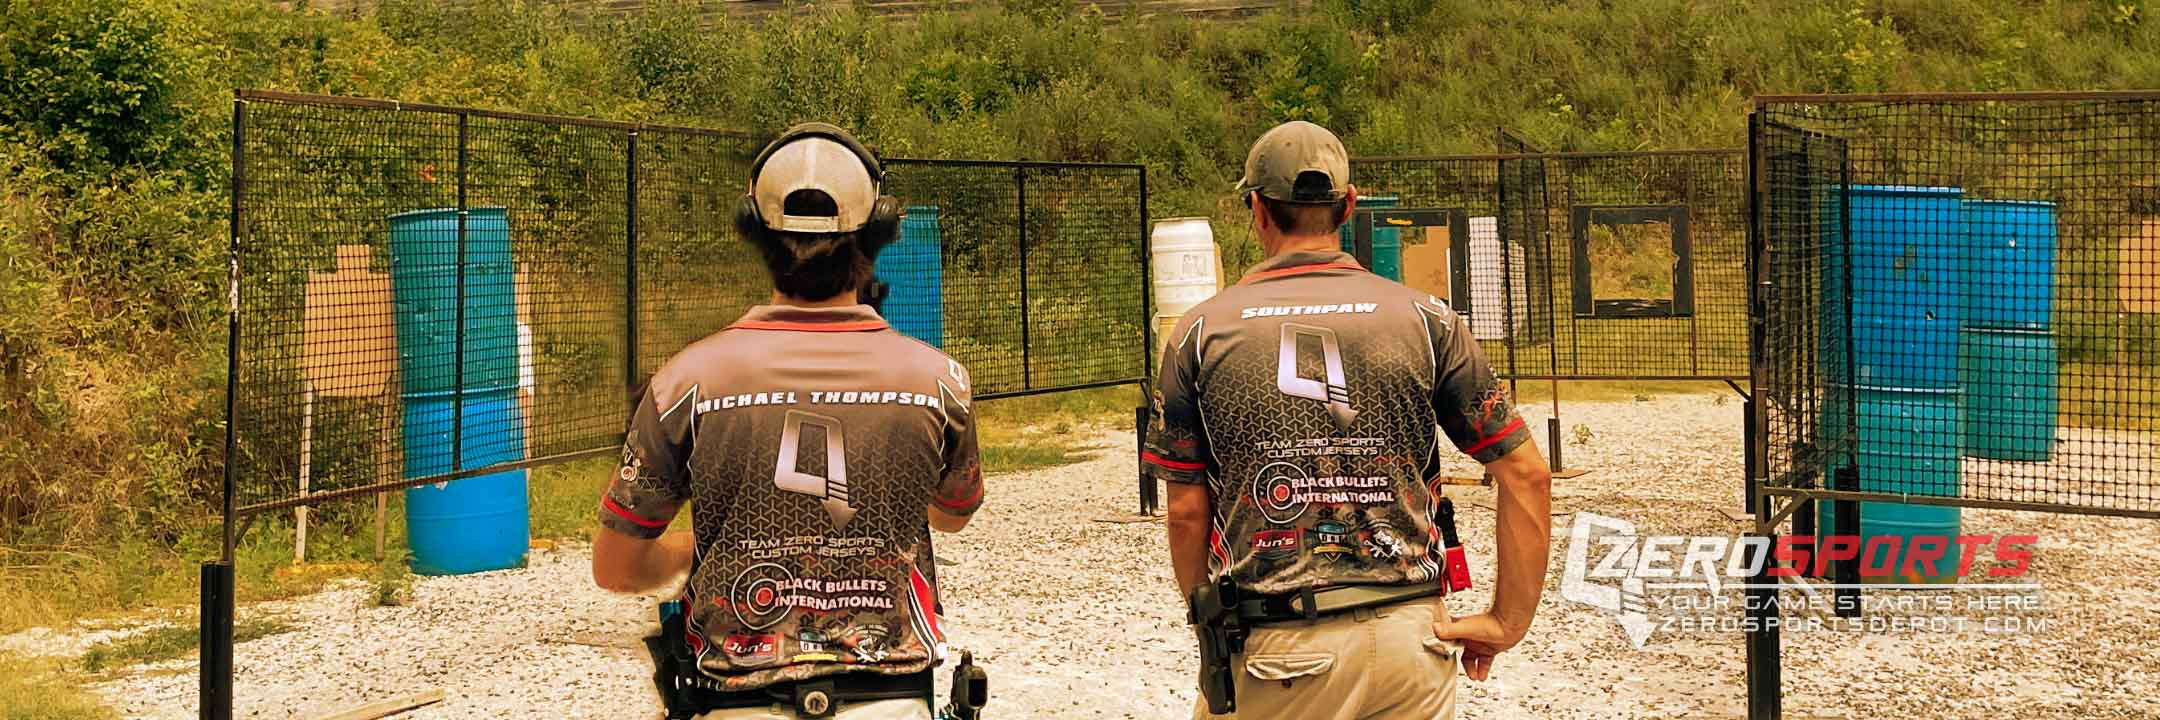 Zero Sports - We can help put your ideas into a custom jersey or you can choose from our wide selection of jersey designs used for USPSA, IDPA, Cornhole, Bowling, Skeet, Trap, Bass Fishing. We also carry Vortex, Trijicon, Glock, CZ, Walther, JP Rifle, bag